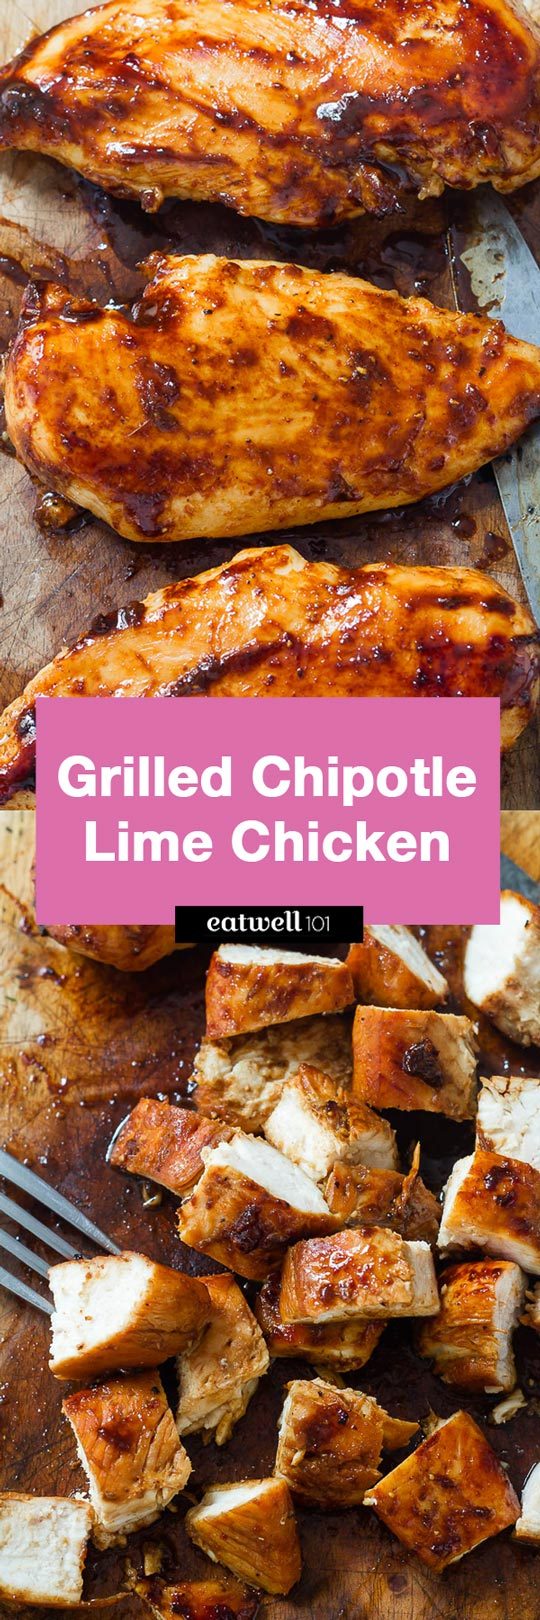 Grilled Chipotle Lime Chicken - Amazing grilled chicken with the most delicious marinade! 